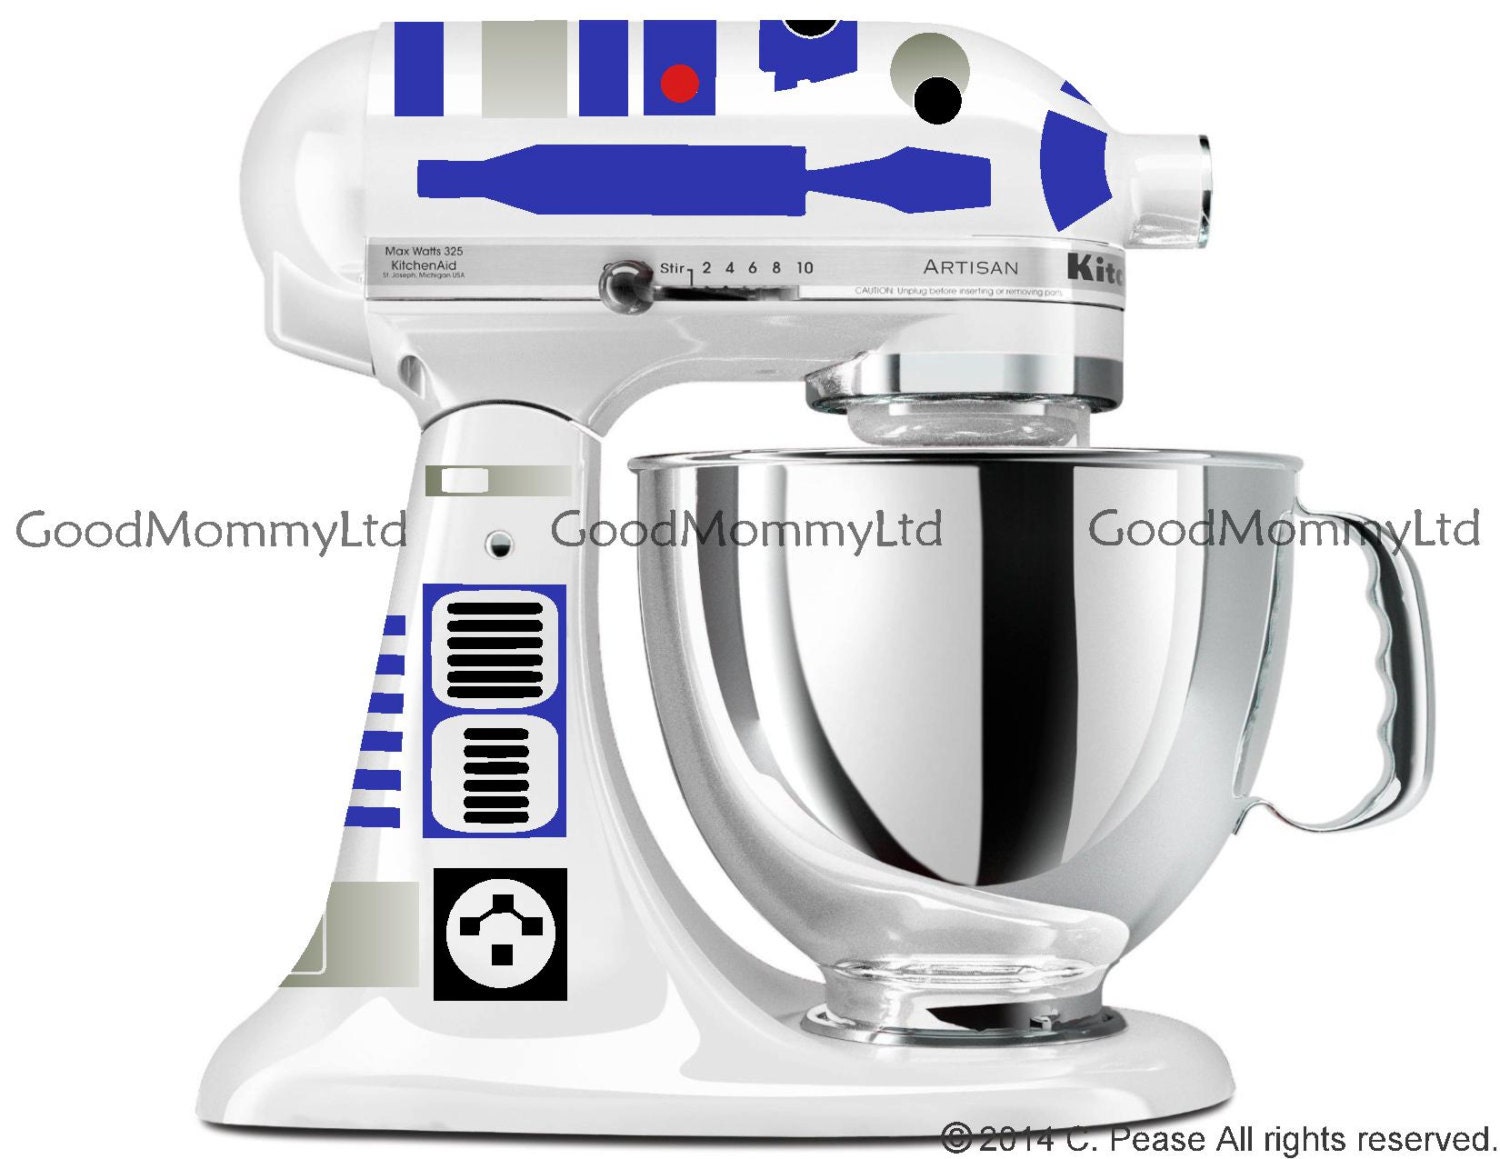 R2D2 Decal Kit For Your KitchenAid Stand Mixer Star Wars